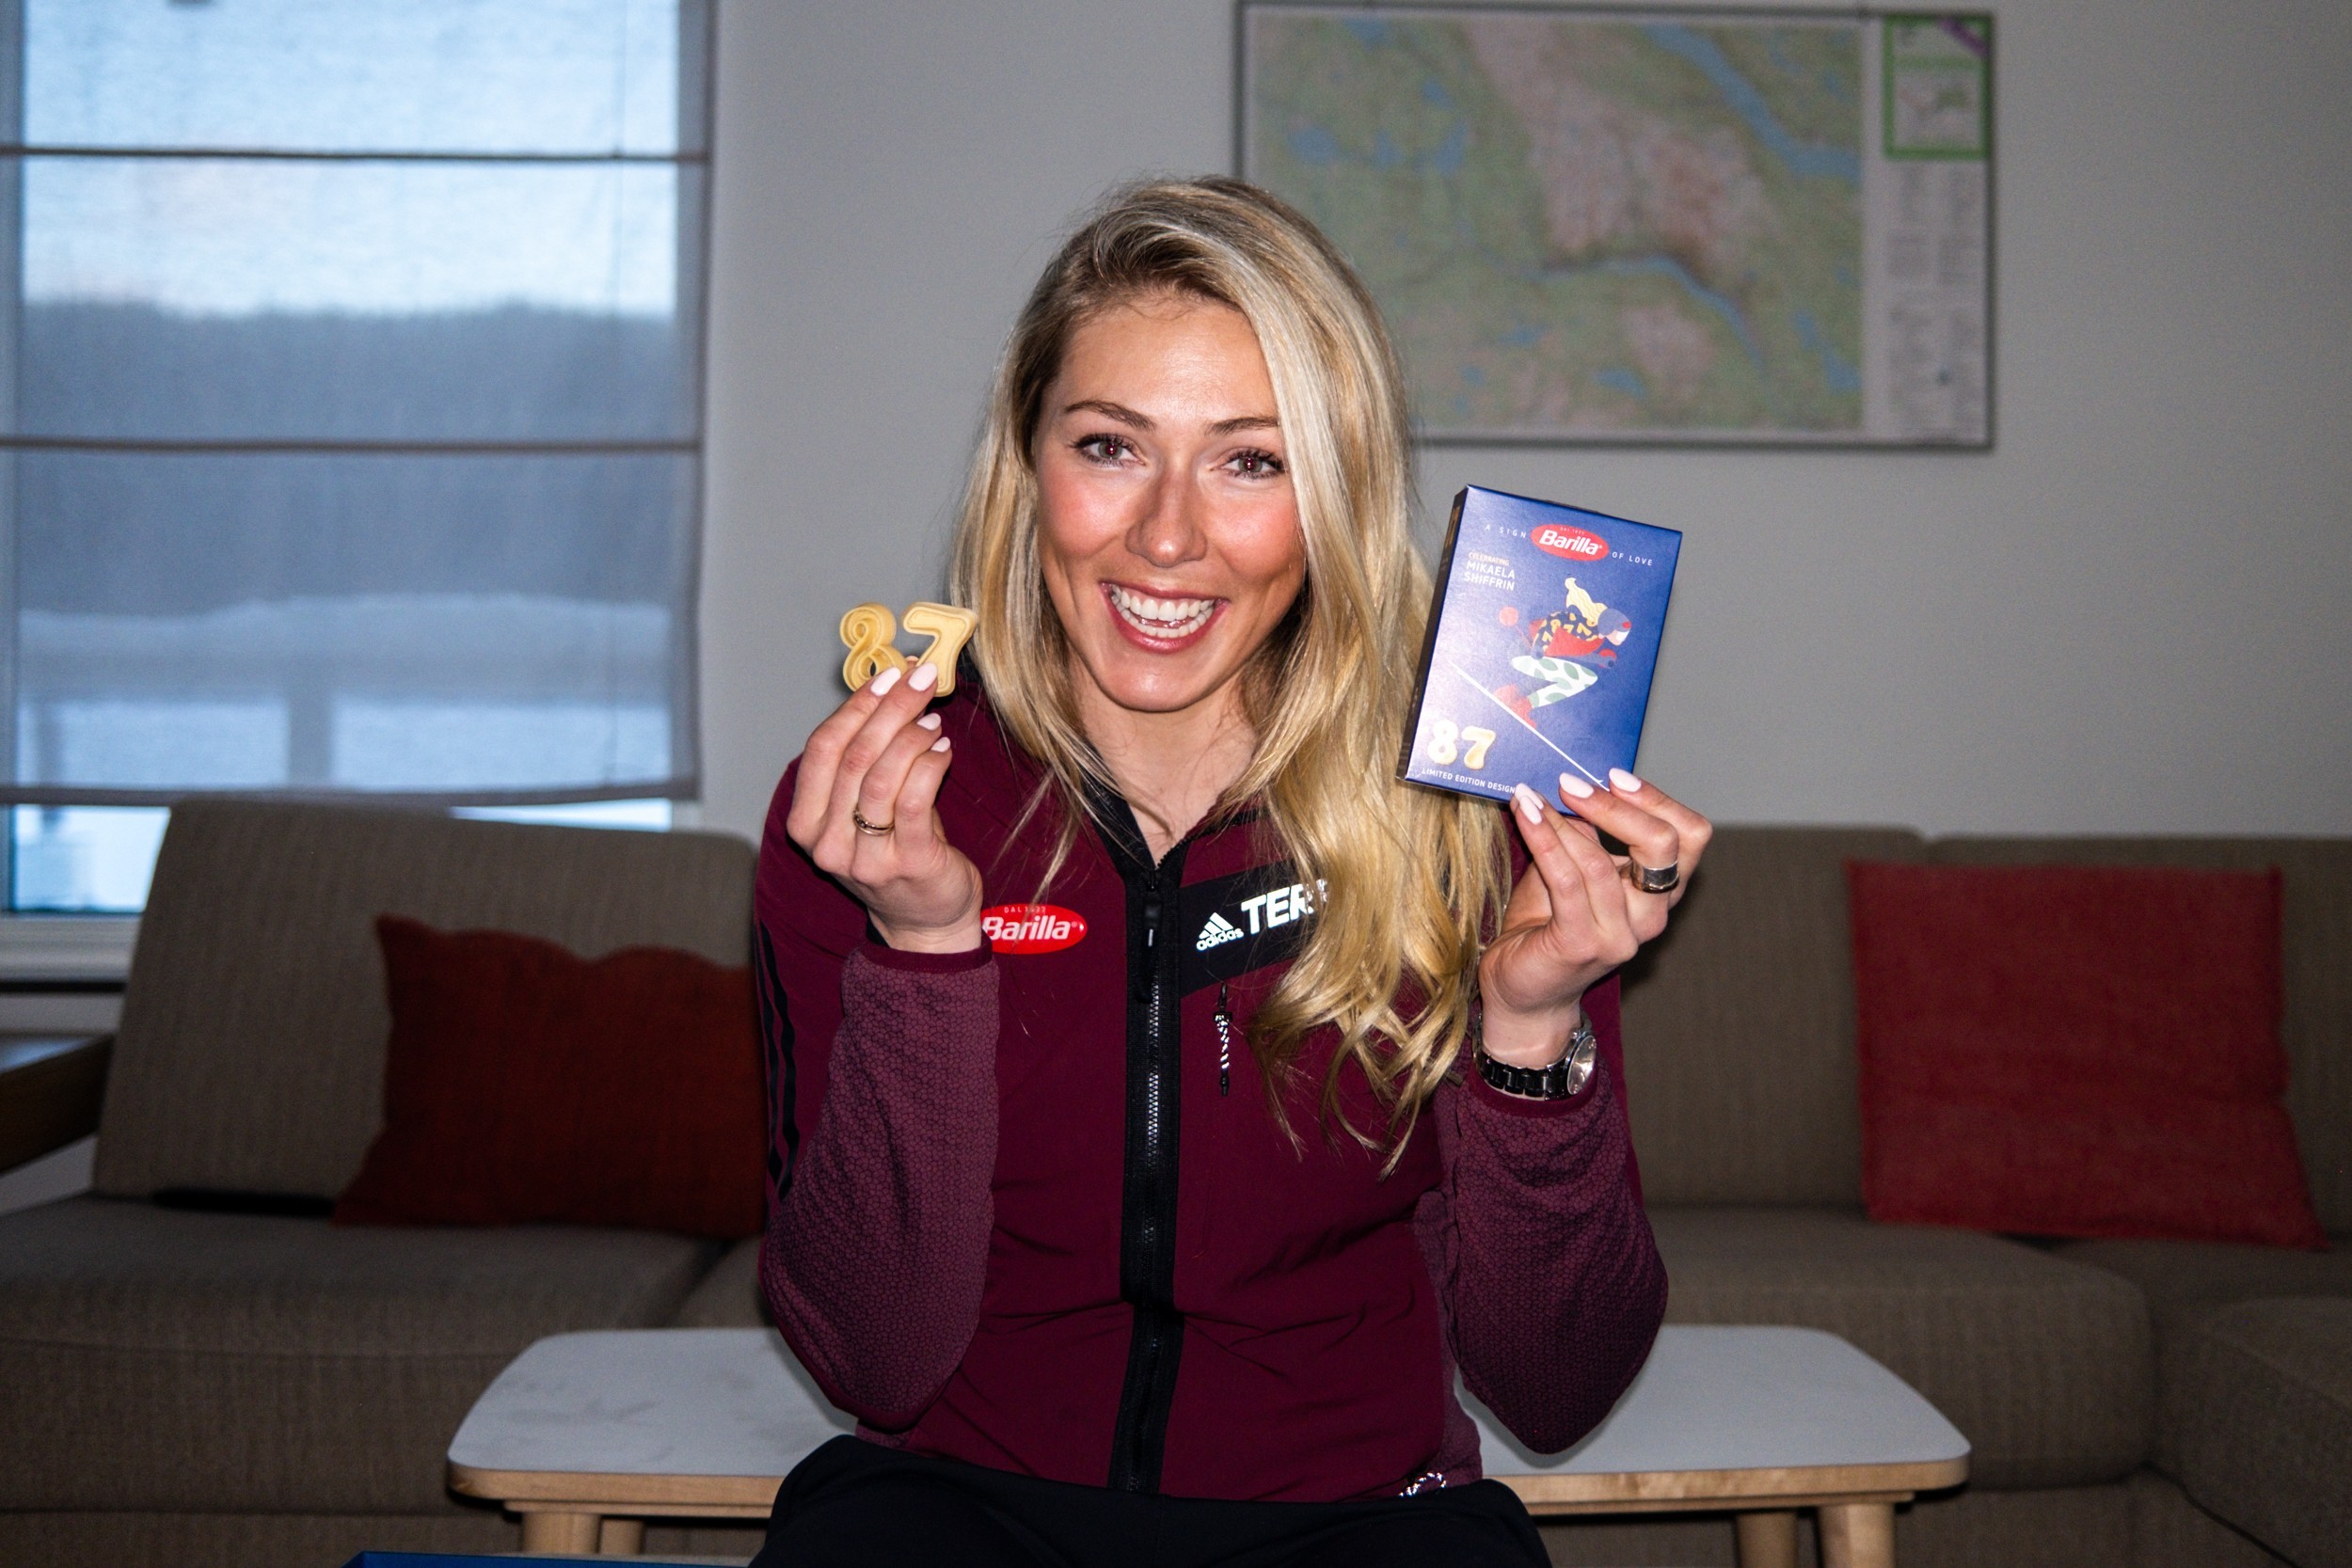 Barilla & Mikaela Shiffrin: Greatness starts with a great recipe - Pack No. 53